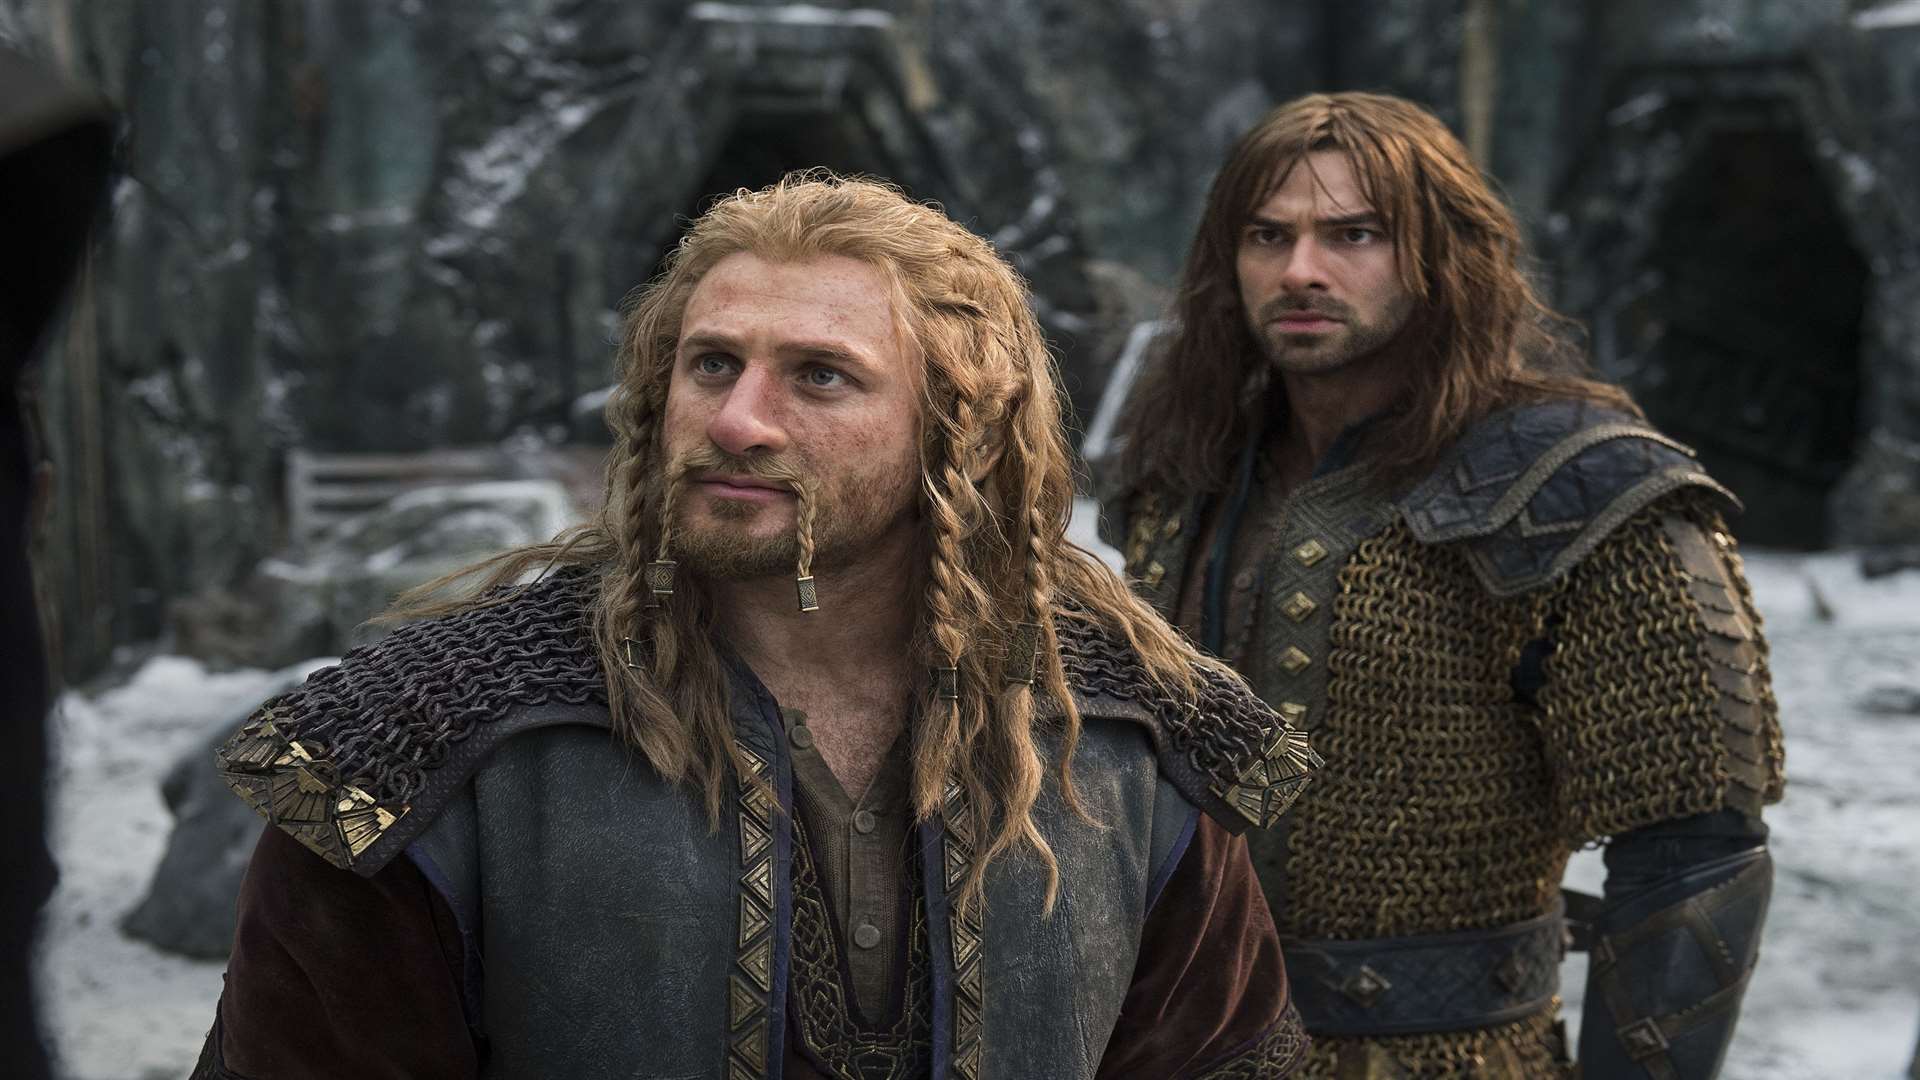 Dean O'Gorman as Fili and Aidan Turner as Kili, in The Hobbit: The Battle Of The Five Armies. Picture: PA Photo/Warner Bros